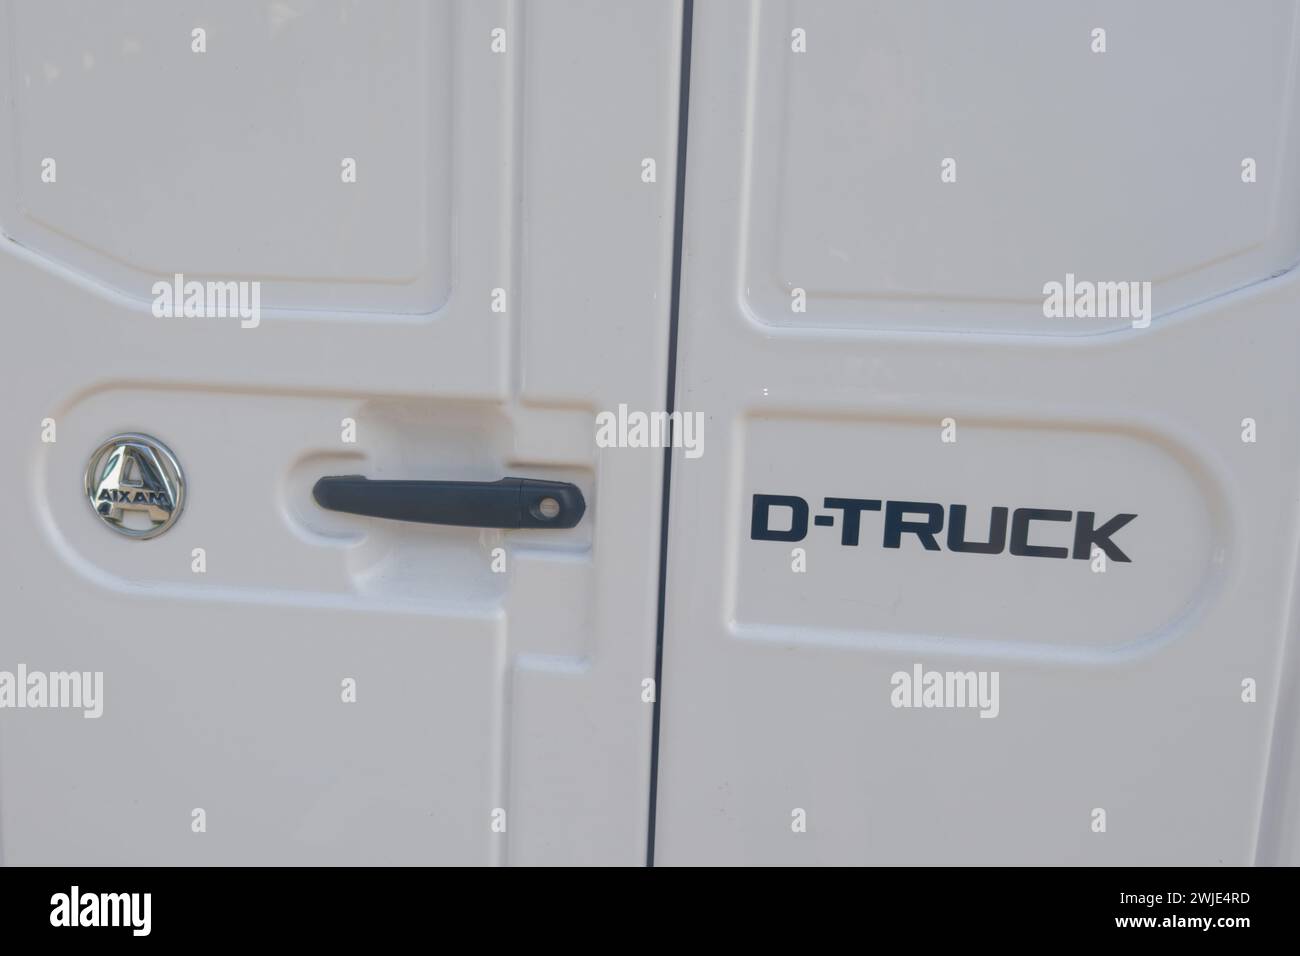 Bordeaux , France -  02 12 2024 : Aixam aixam d-truck logo brand and text sign street French automobile manufacturer without driving license Stock Photo